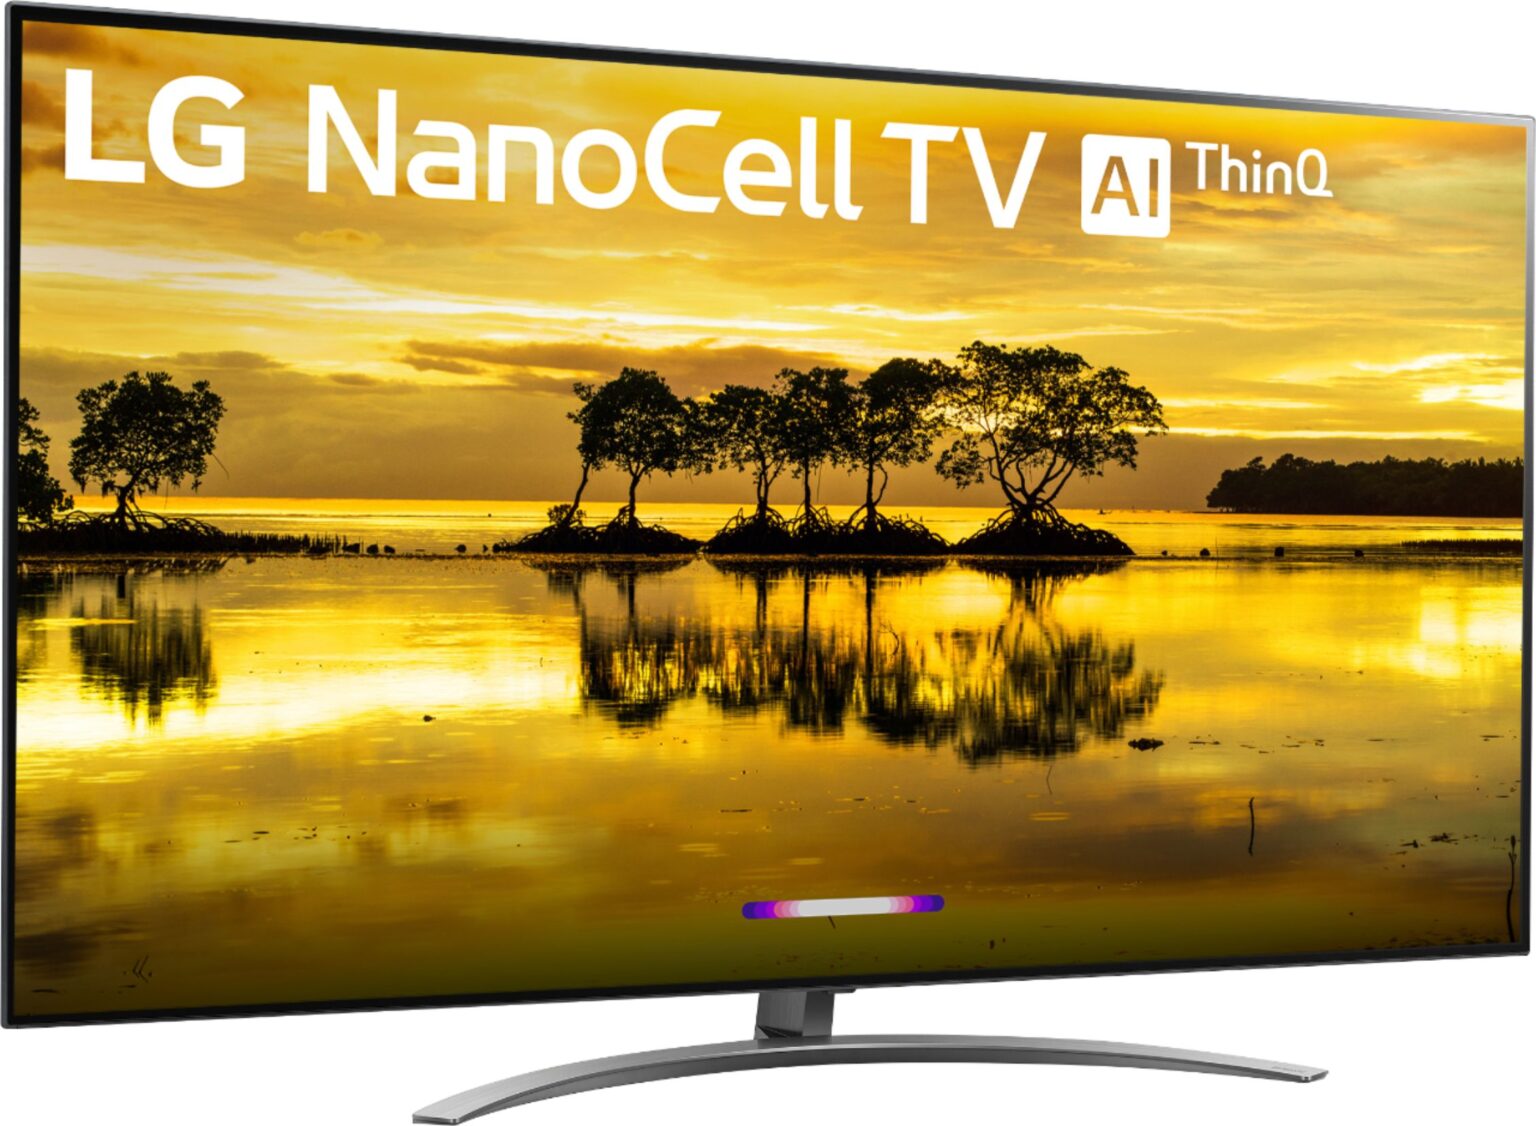 Best LG Nano Cell TV In India (Review 2020) Top Ranke